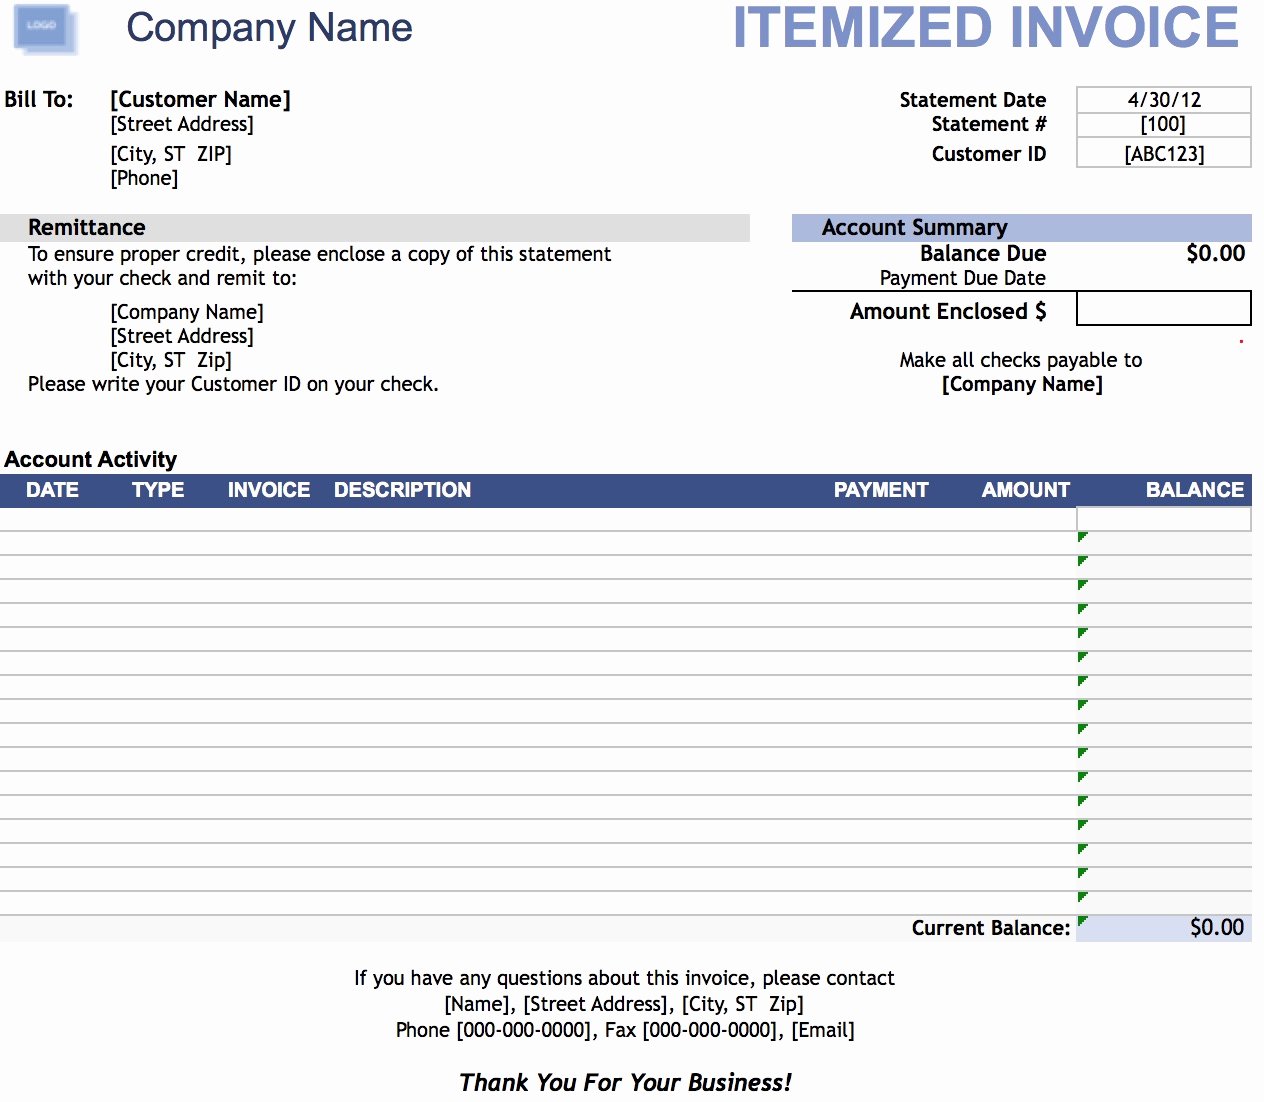 Is An Invoice A Receipt Lovely Itemized Invoice Template